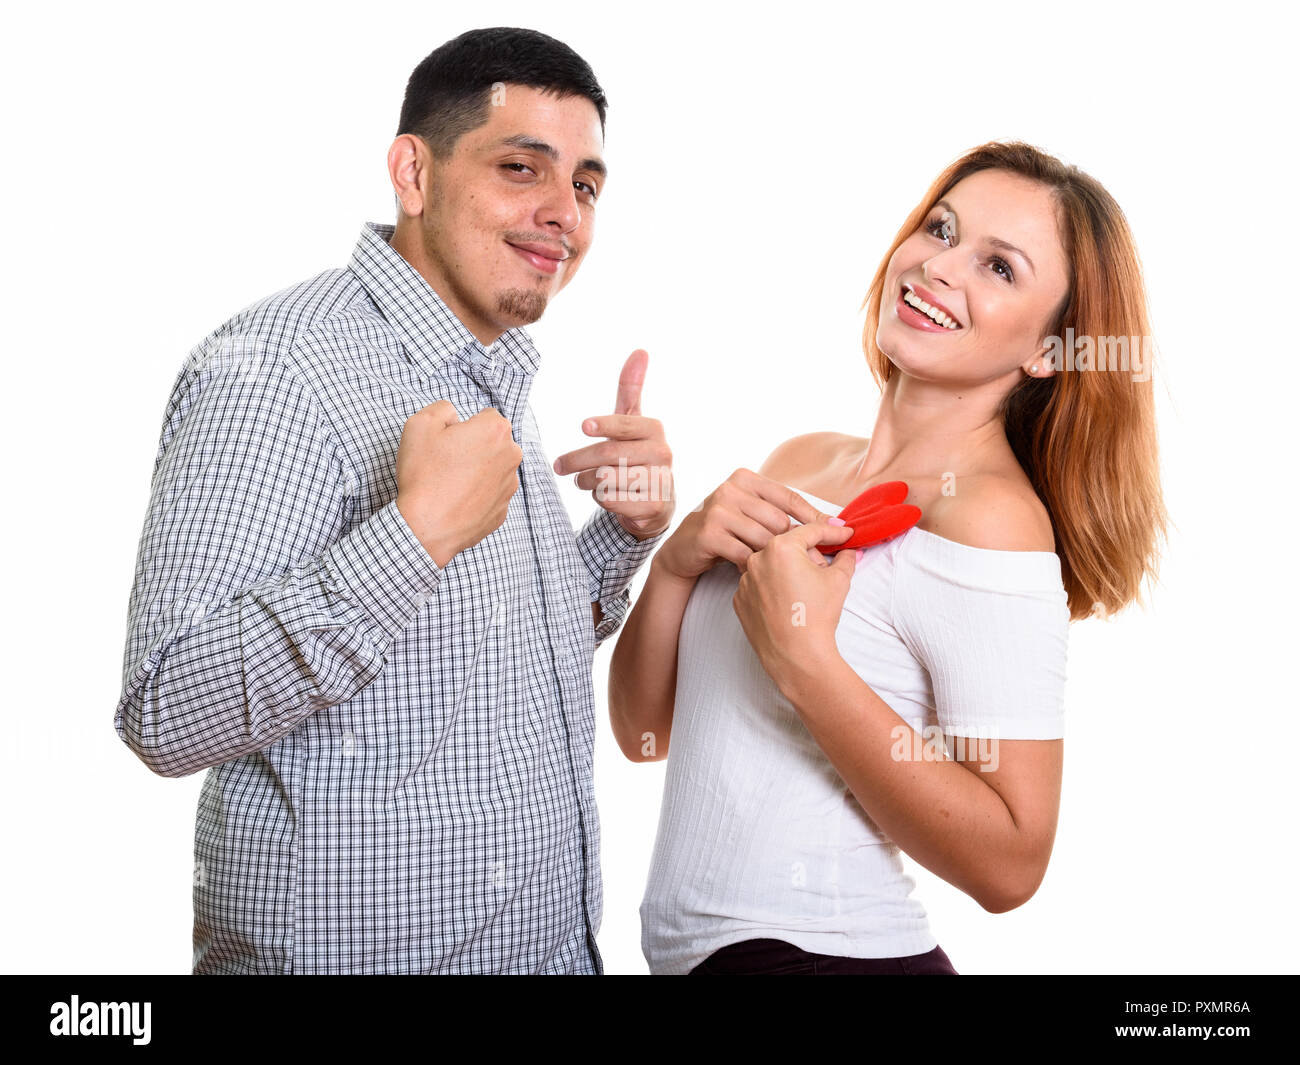 Young happy Hispanic couple smiling and in love Stock Photo